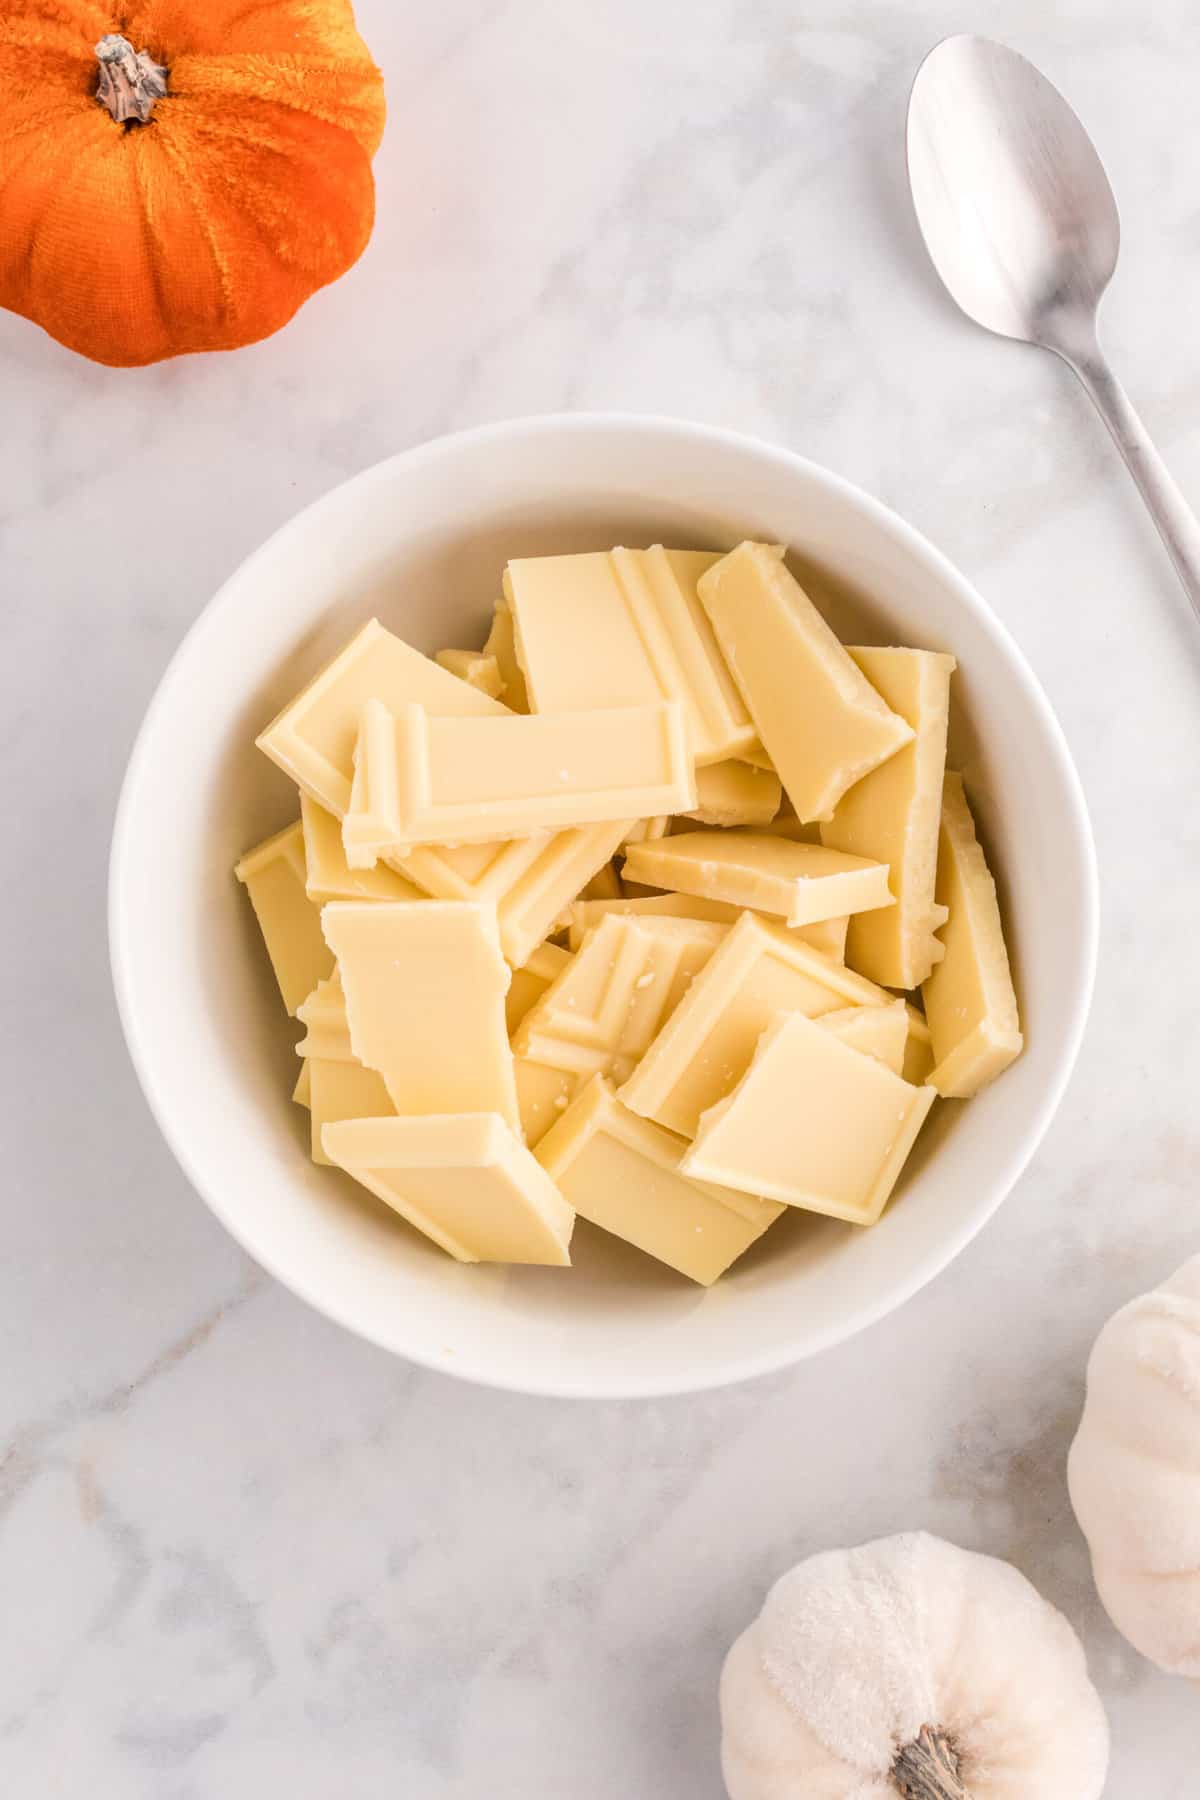 In a Small Microwave Safe bowl melt white chocolate.